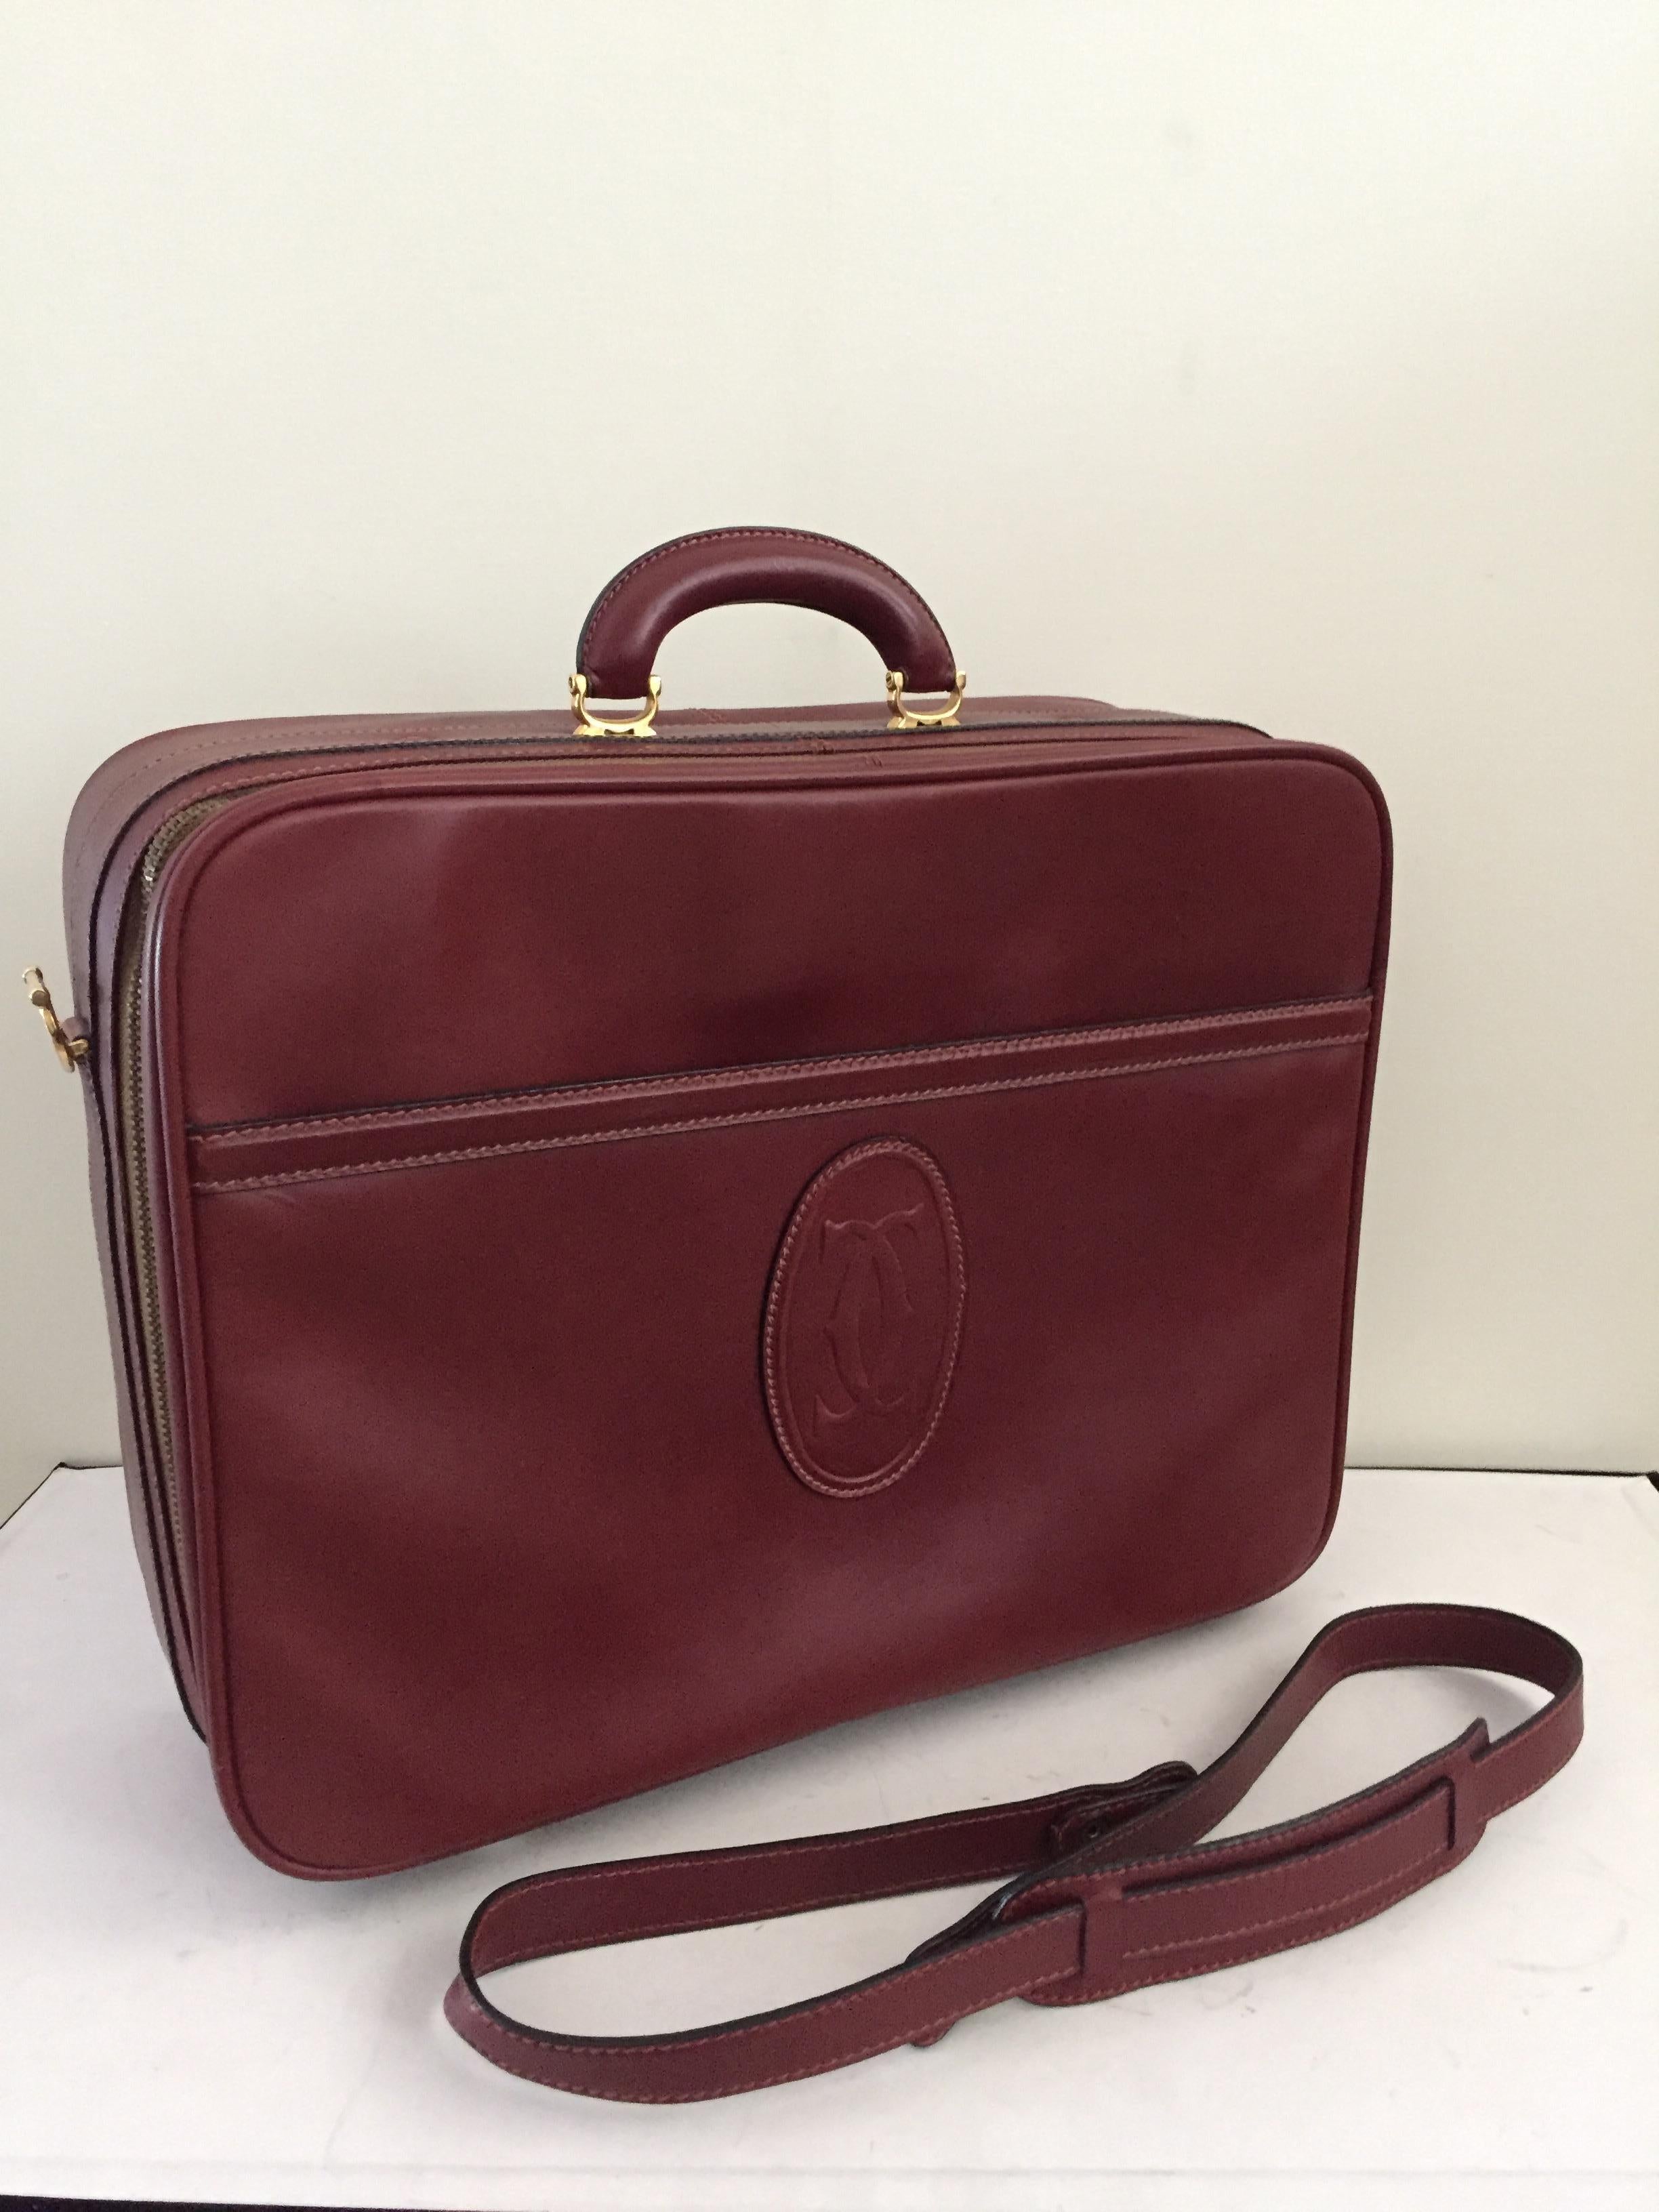 French Cartier Les Must de Cartier Burgundy Leather Travel Overnight Suitcase / Luggage